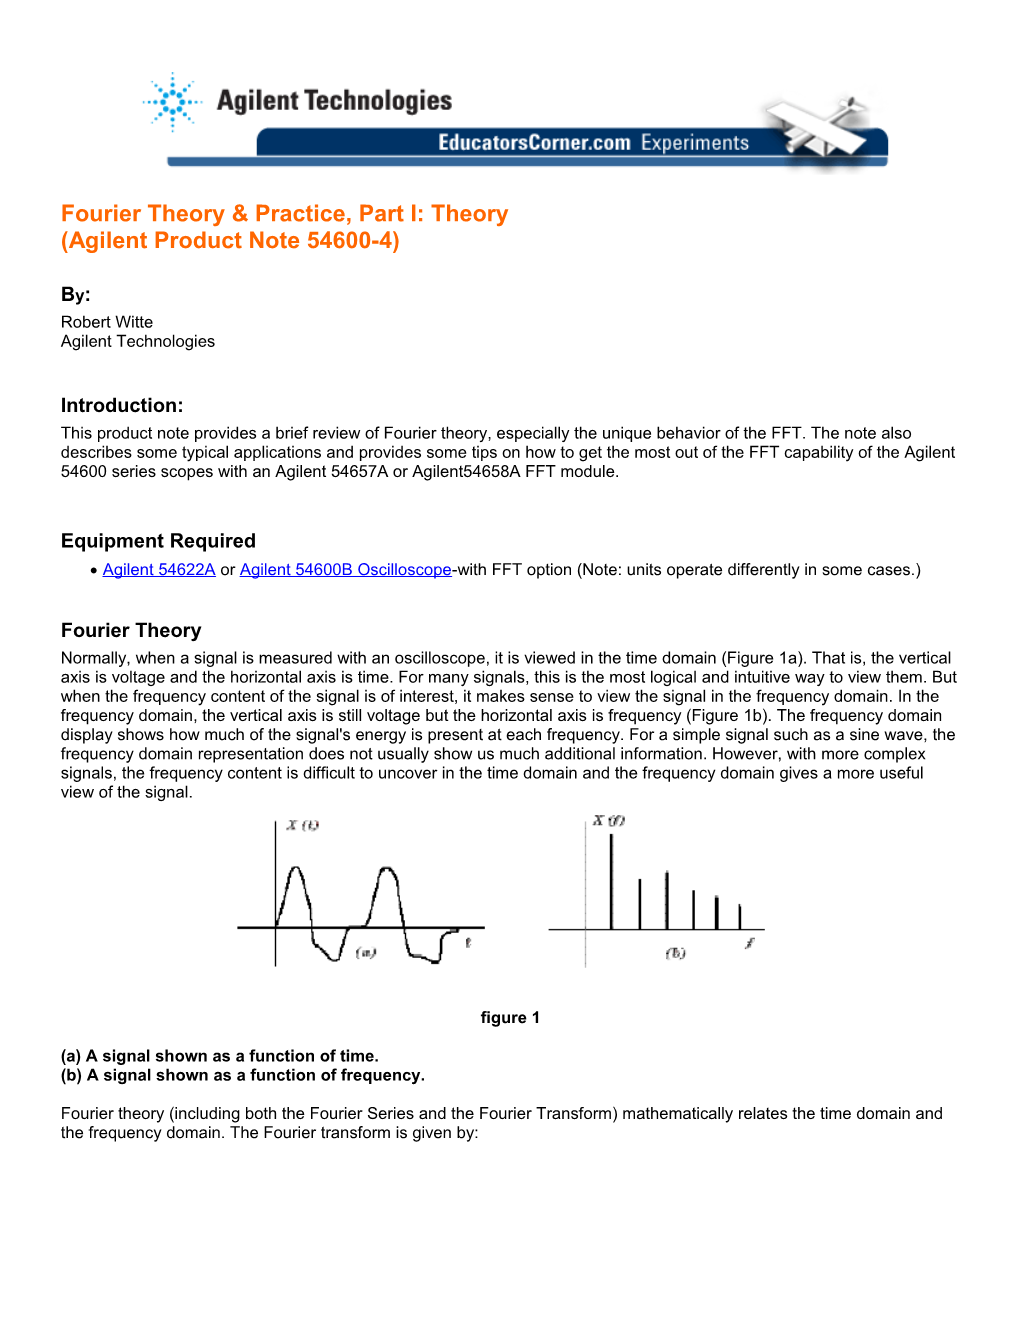 Fourier Theory & Practice, Part I: Theory